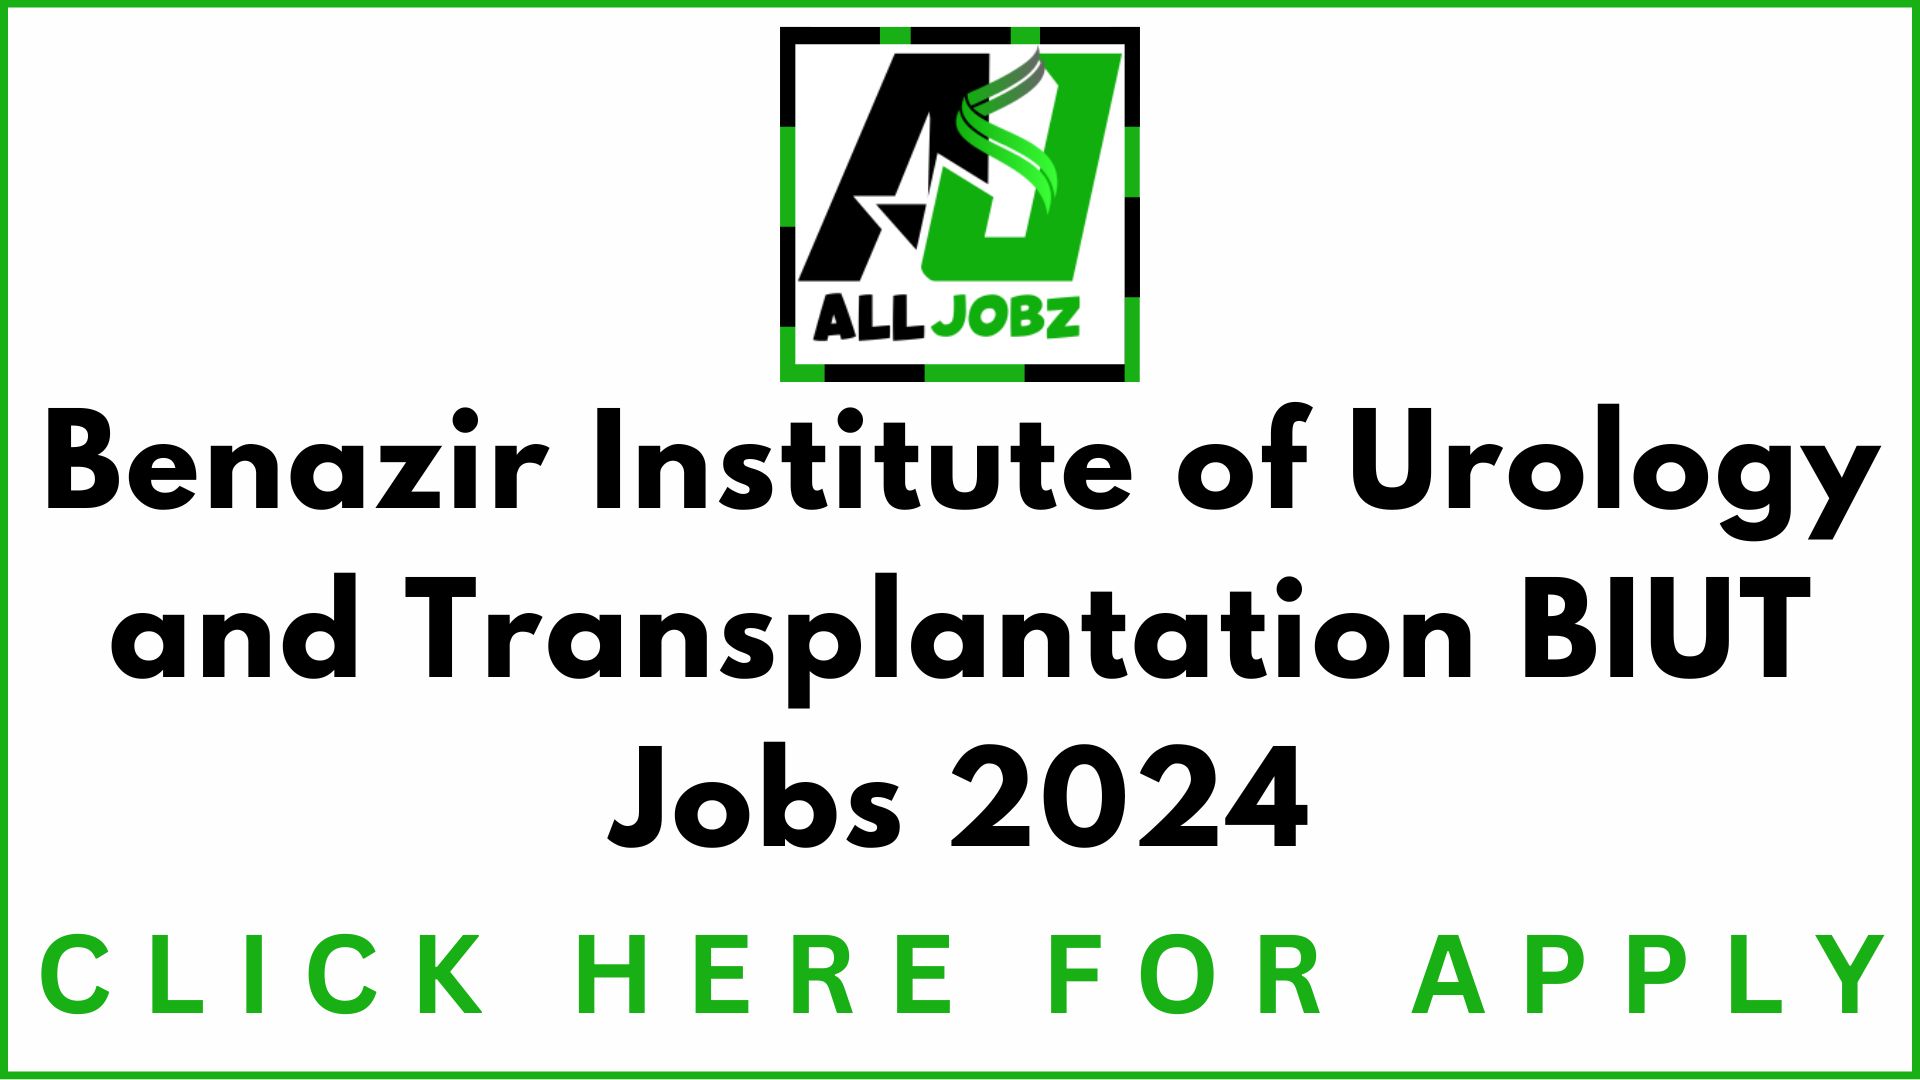 Latest Benazir Institute Of Urology And Transplantation Biut Education Posts 2024, Opportunities At Benazir Institute Of Urology And Transplantation, Benazir Institute Of Urology And Transplantation Jobs 2024 Salary, Benazir Institute Of Urology And Transplantation Jobs 2024 Last Date, Benazir Institute Of Urology And Transplantation Jobs 2024 Online, Benazir Institute Of Urology And Transplantation Jobs 2024 Last, Benazir Institute Of Urology And Transplantation Jobs 2024 Apply,